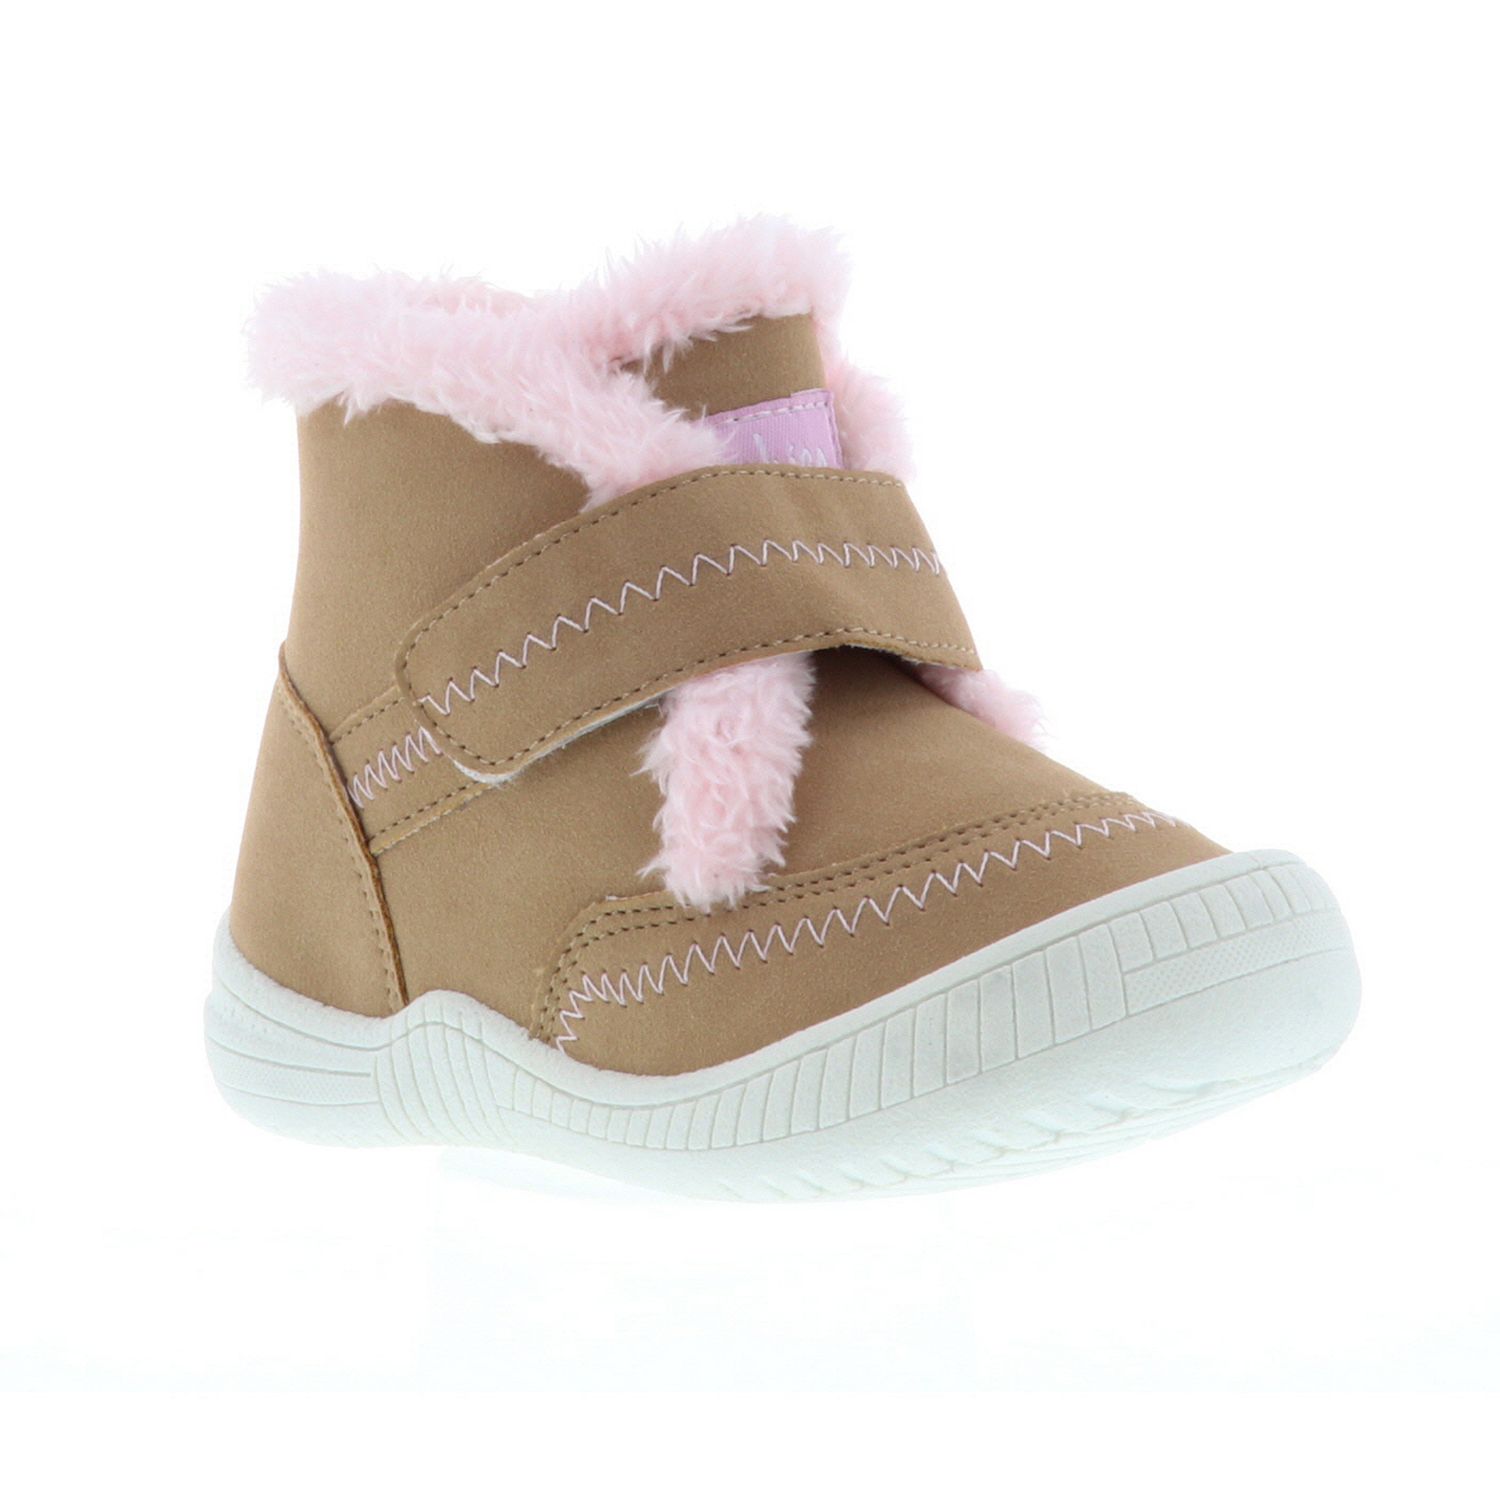 oomphies baby shoes